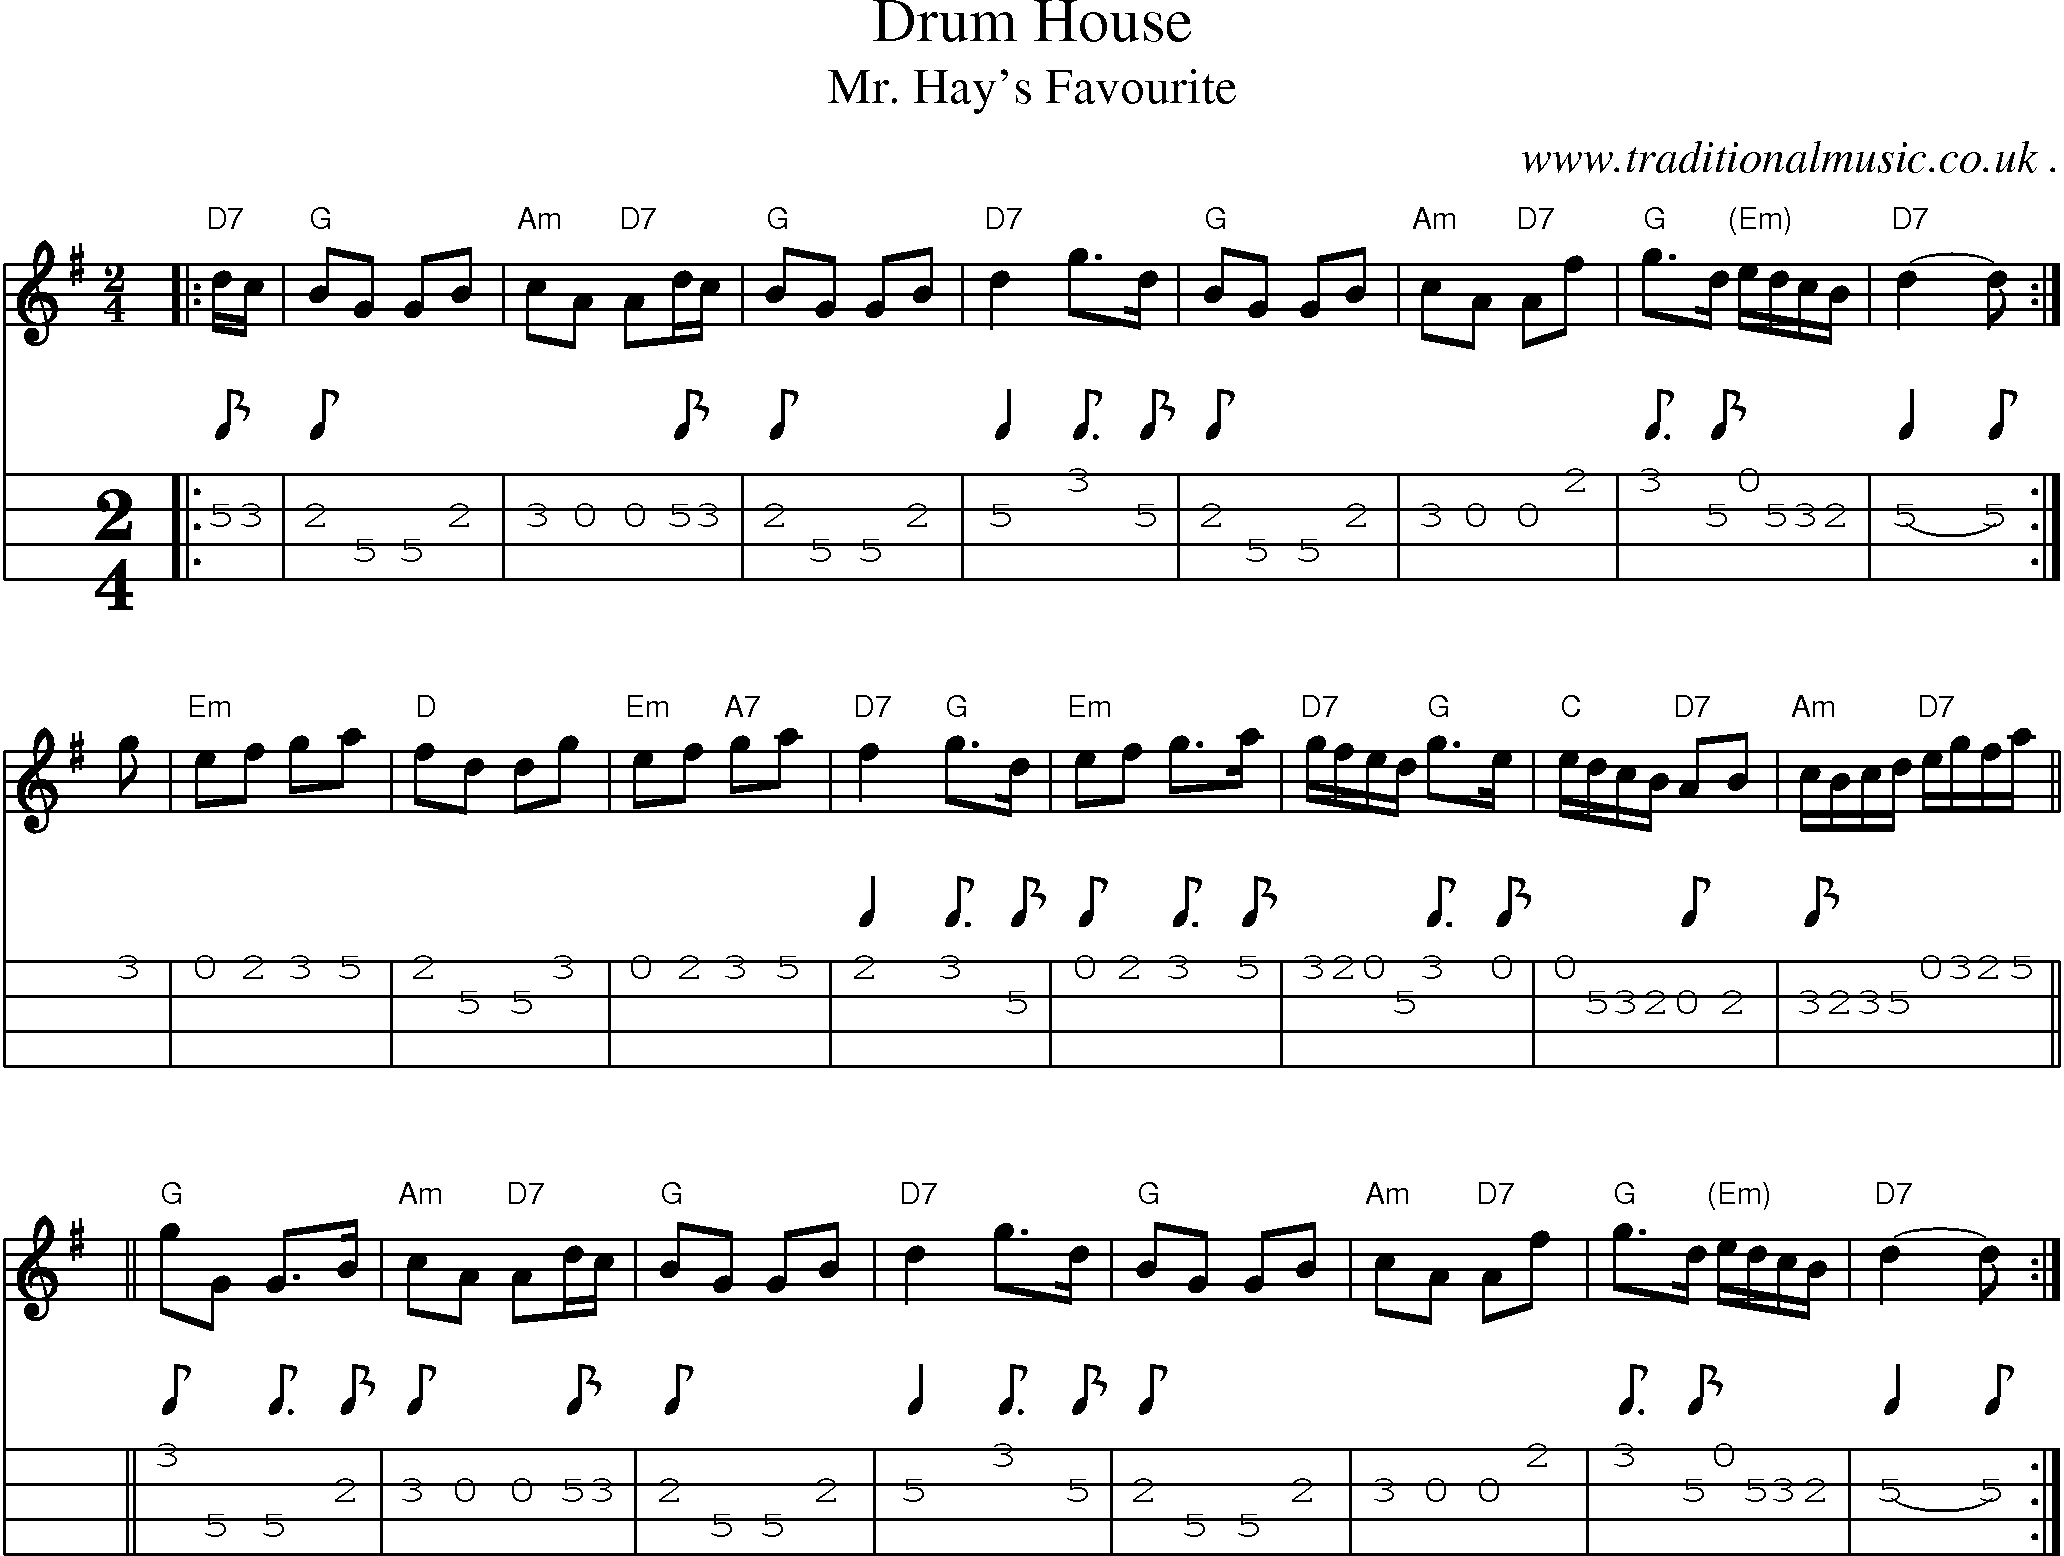 Sheet-music  score, Chords and Mandolin Tabs for Drum House